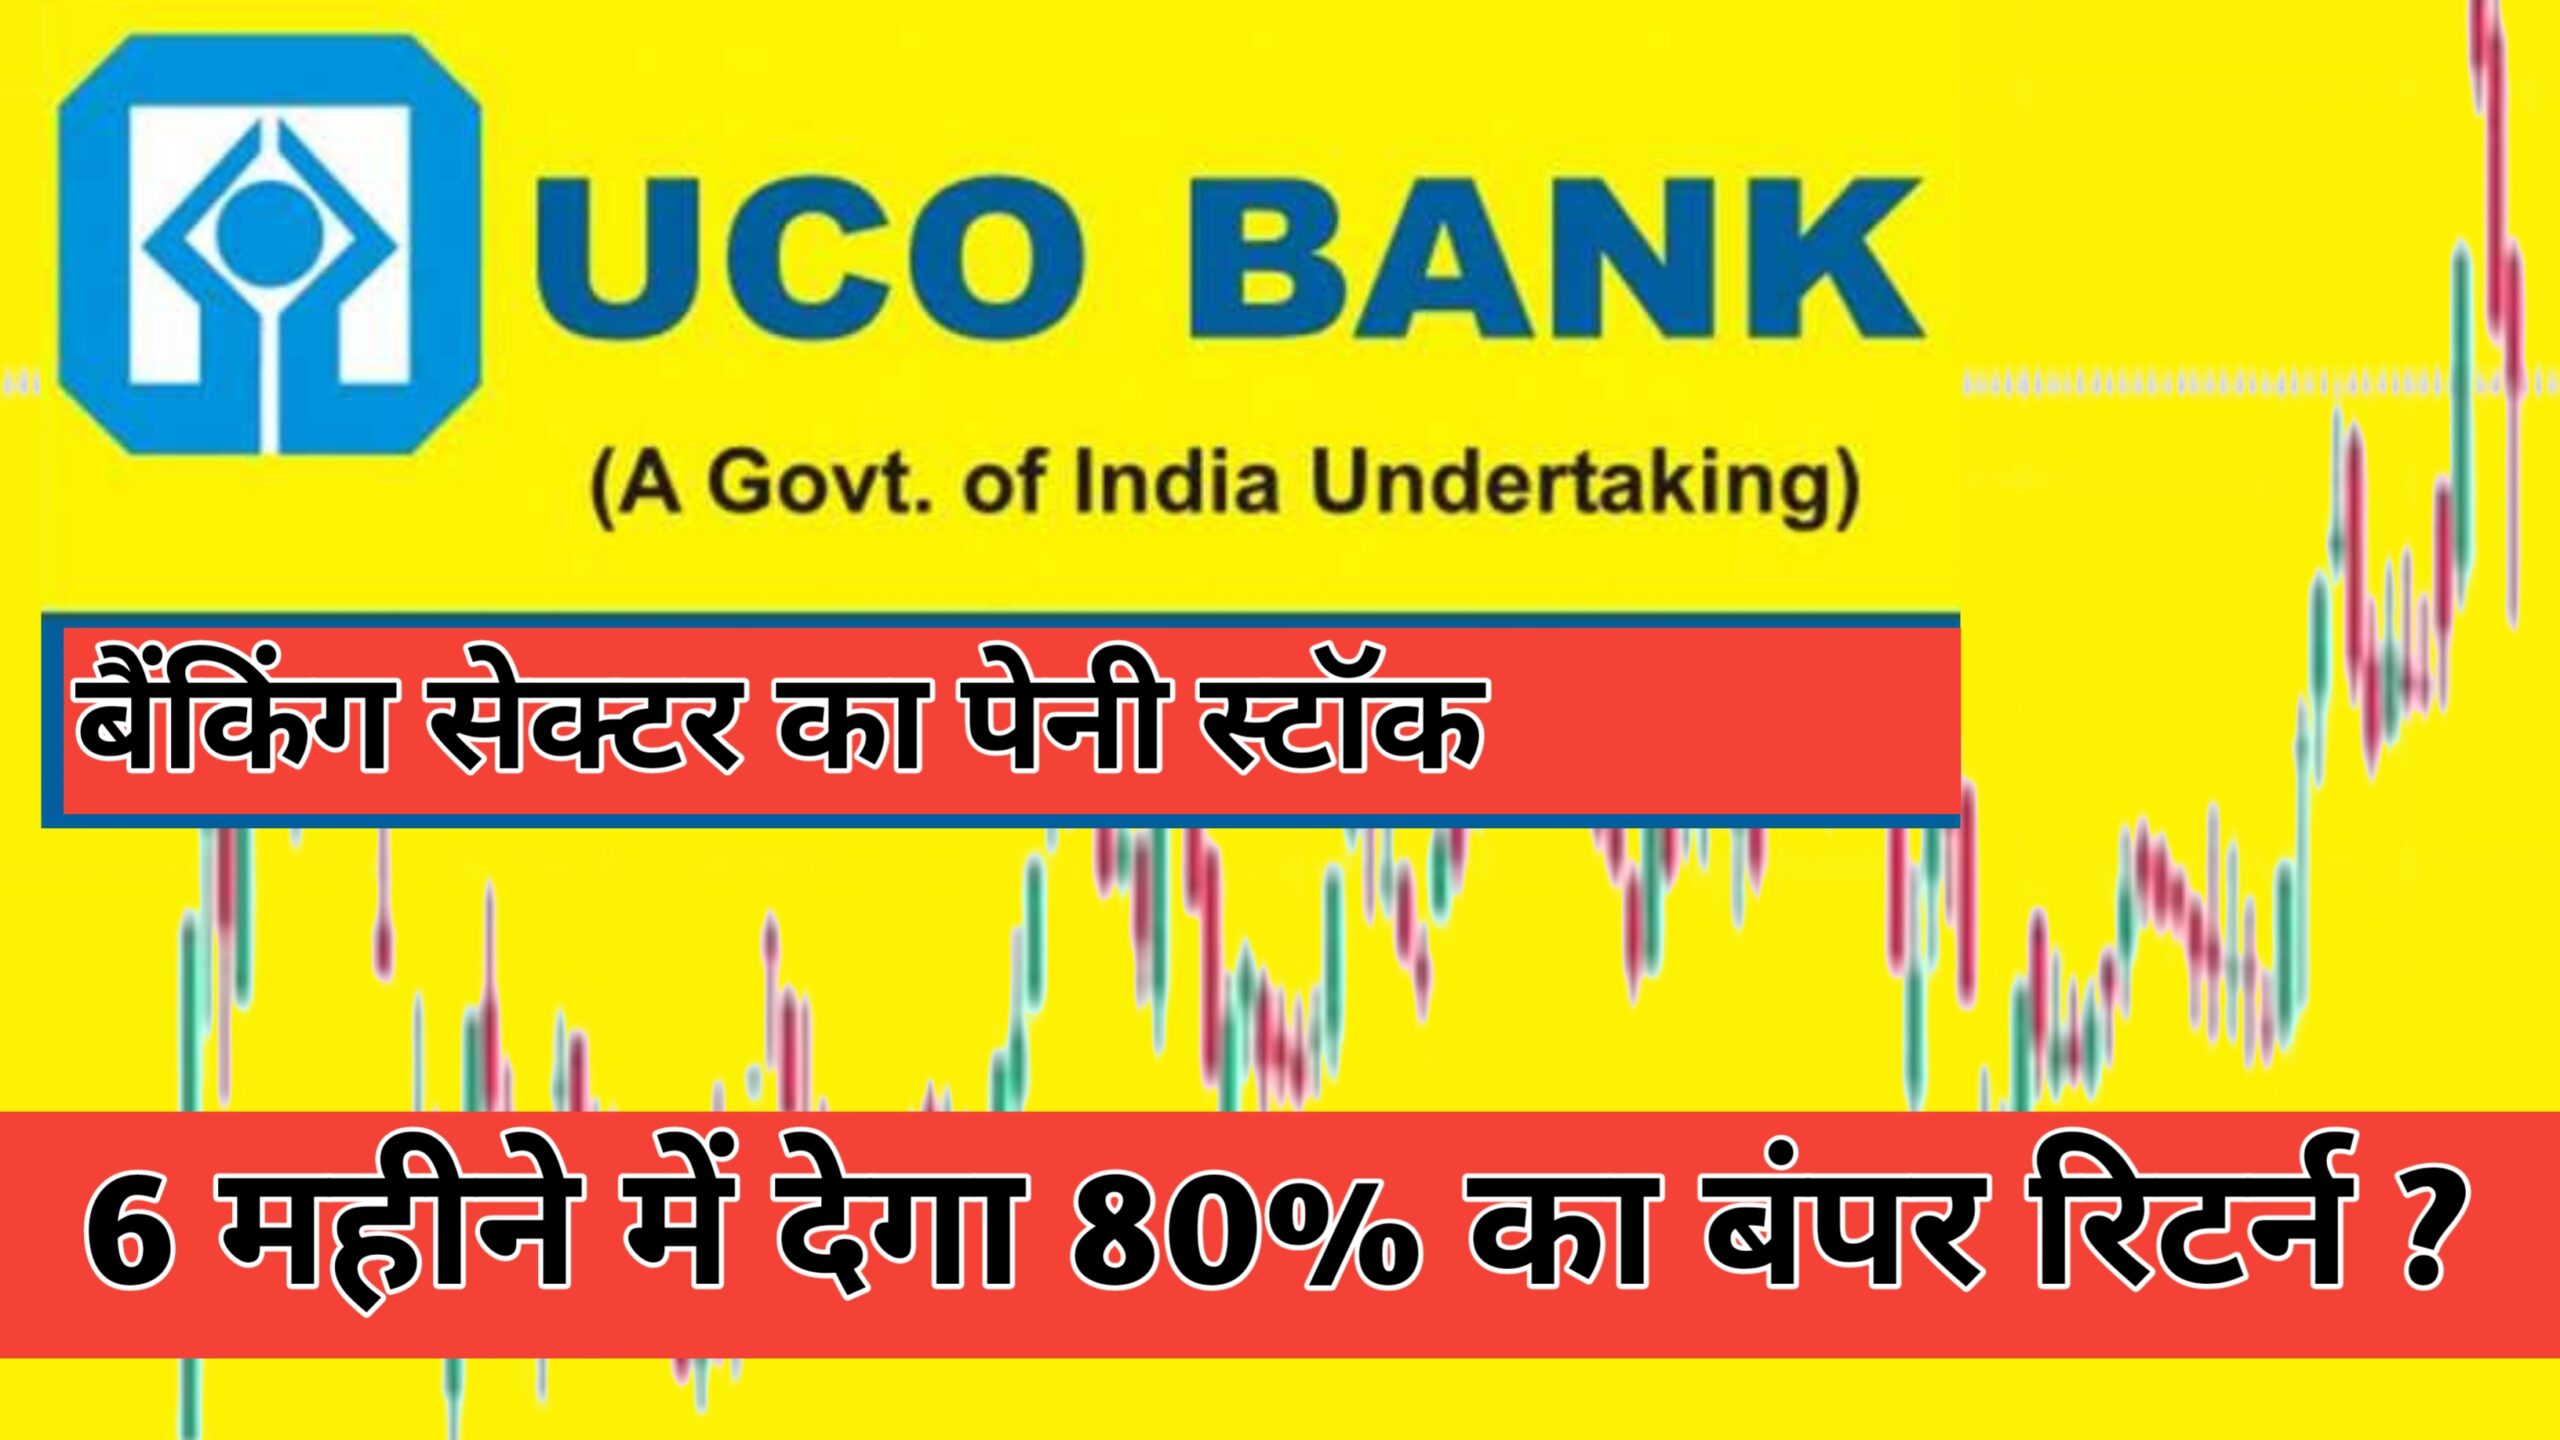 Navigate through the Historical Stock Prices of UCO Bank